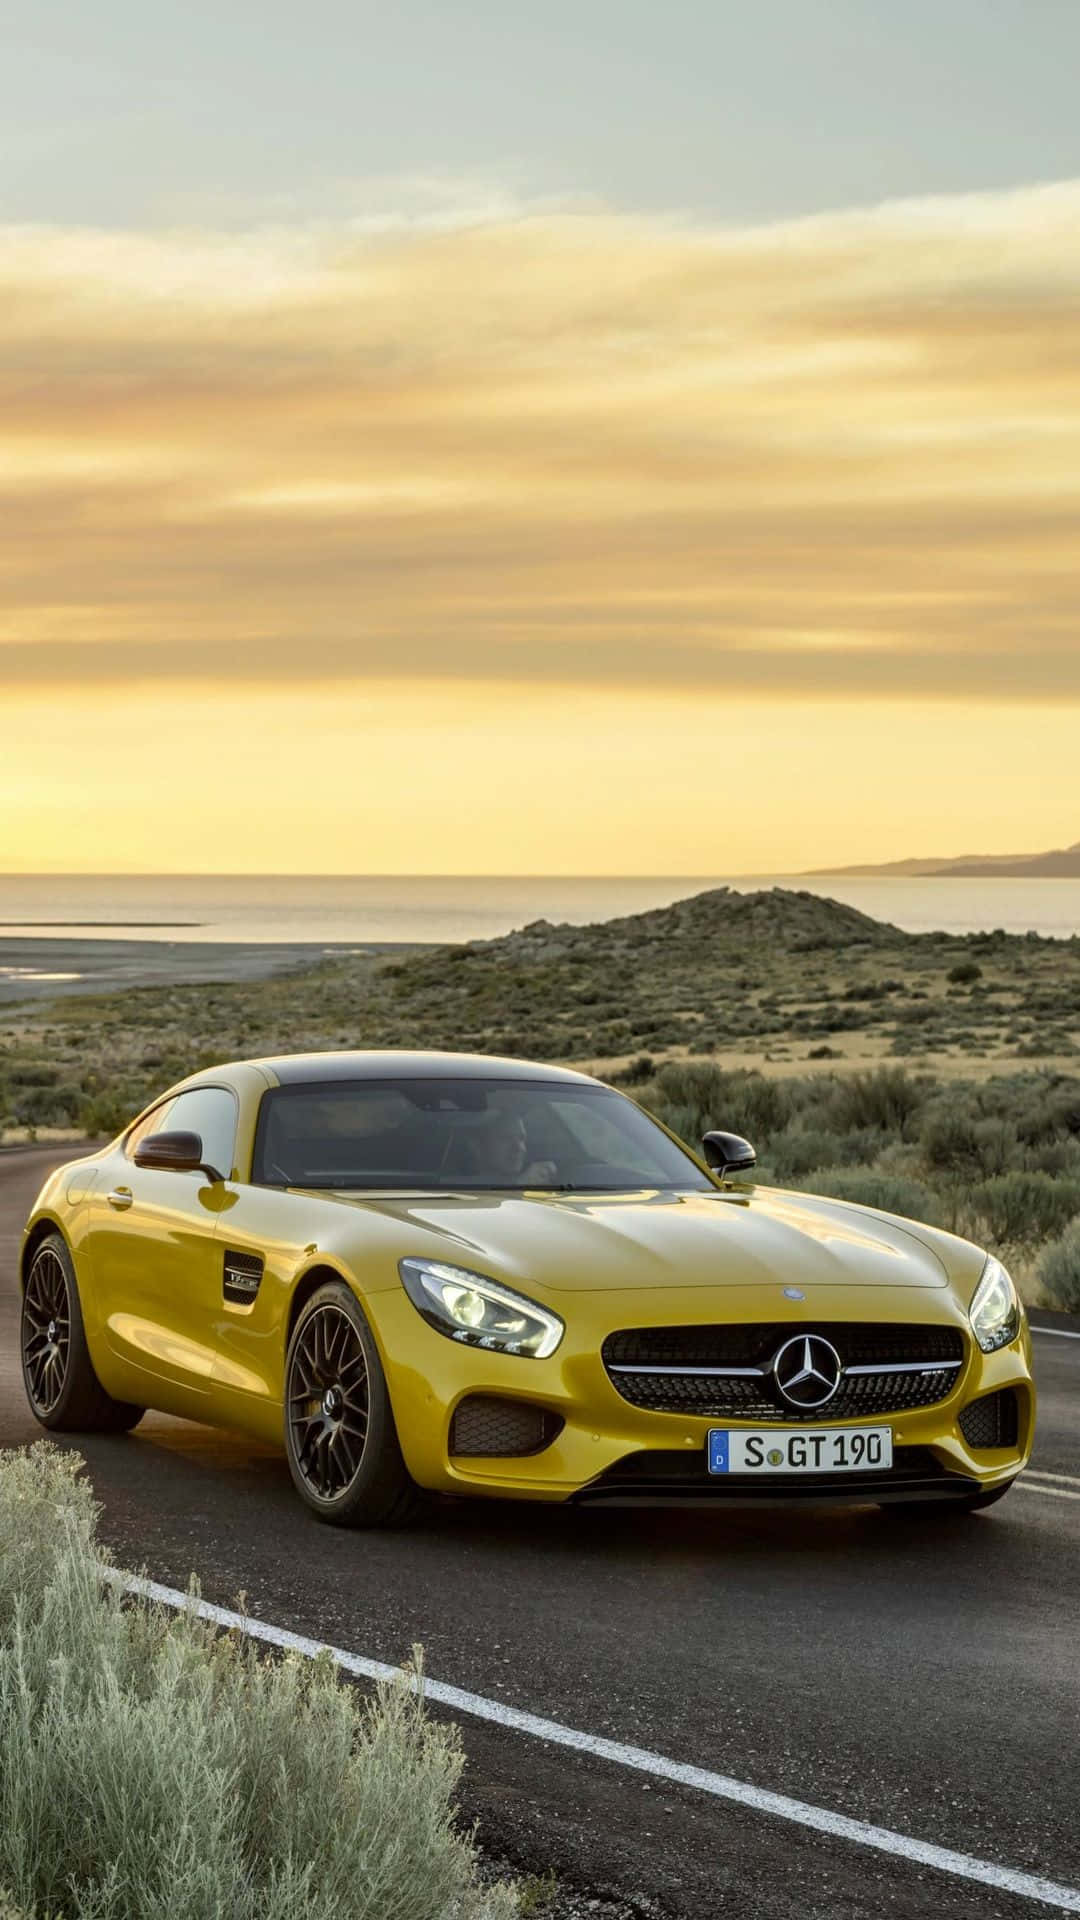 Get Ready to Cruise in Style with a Mercedes Benz iPhone Wallpaper